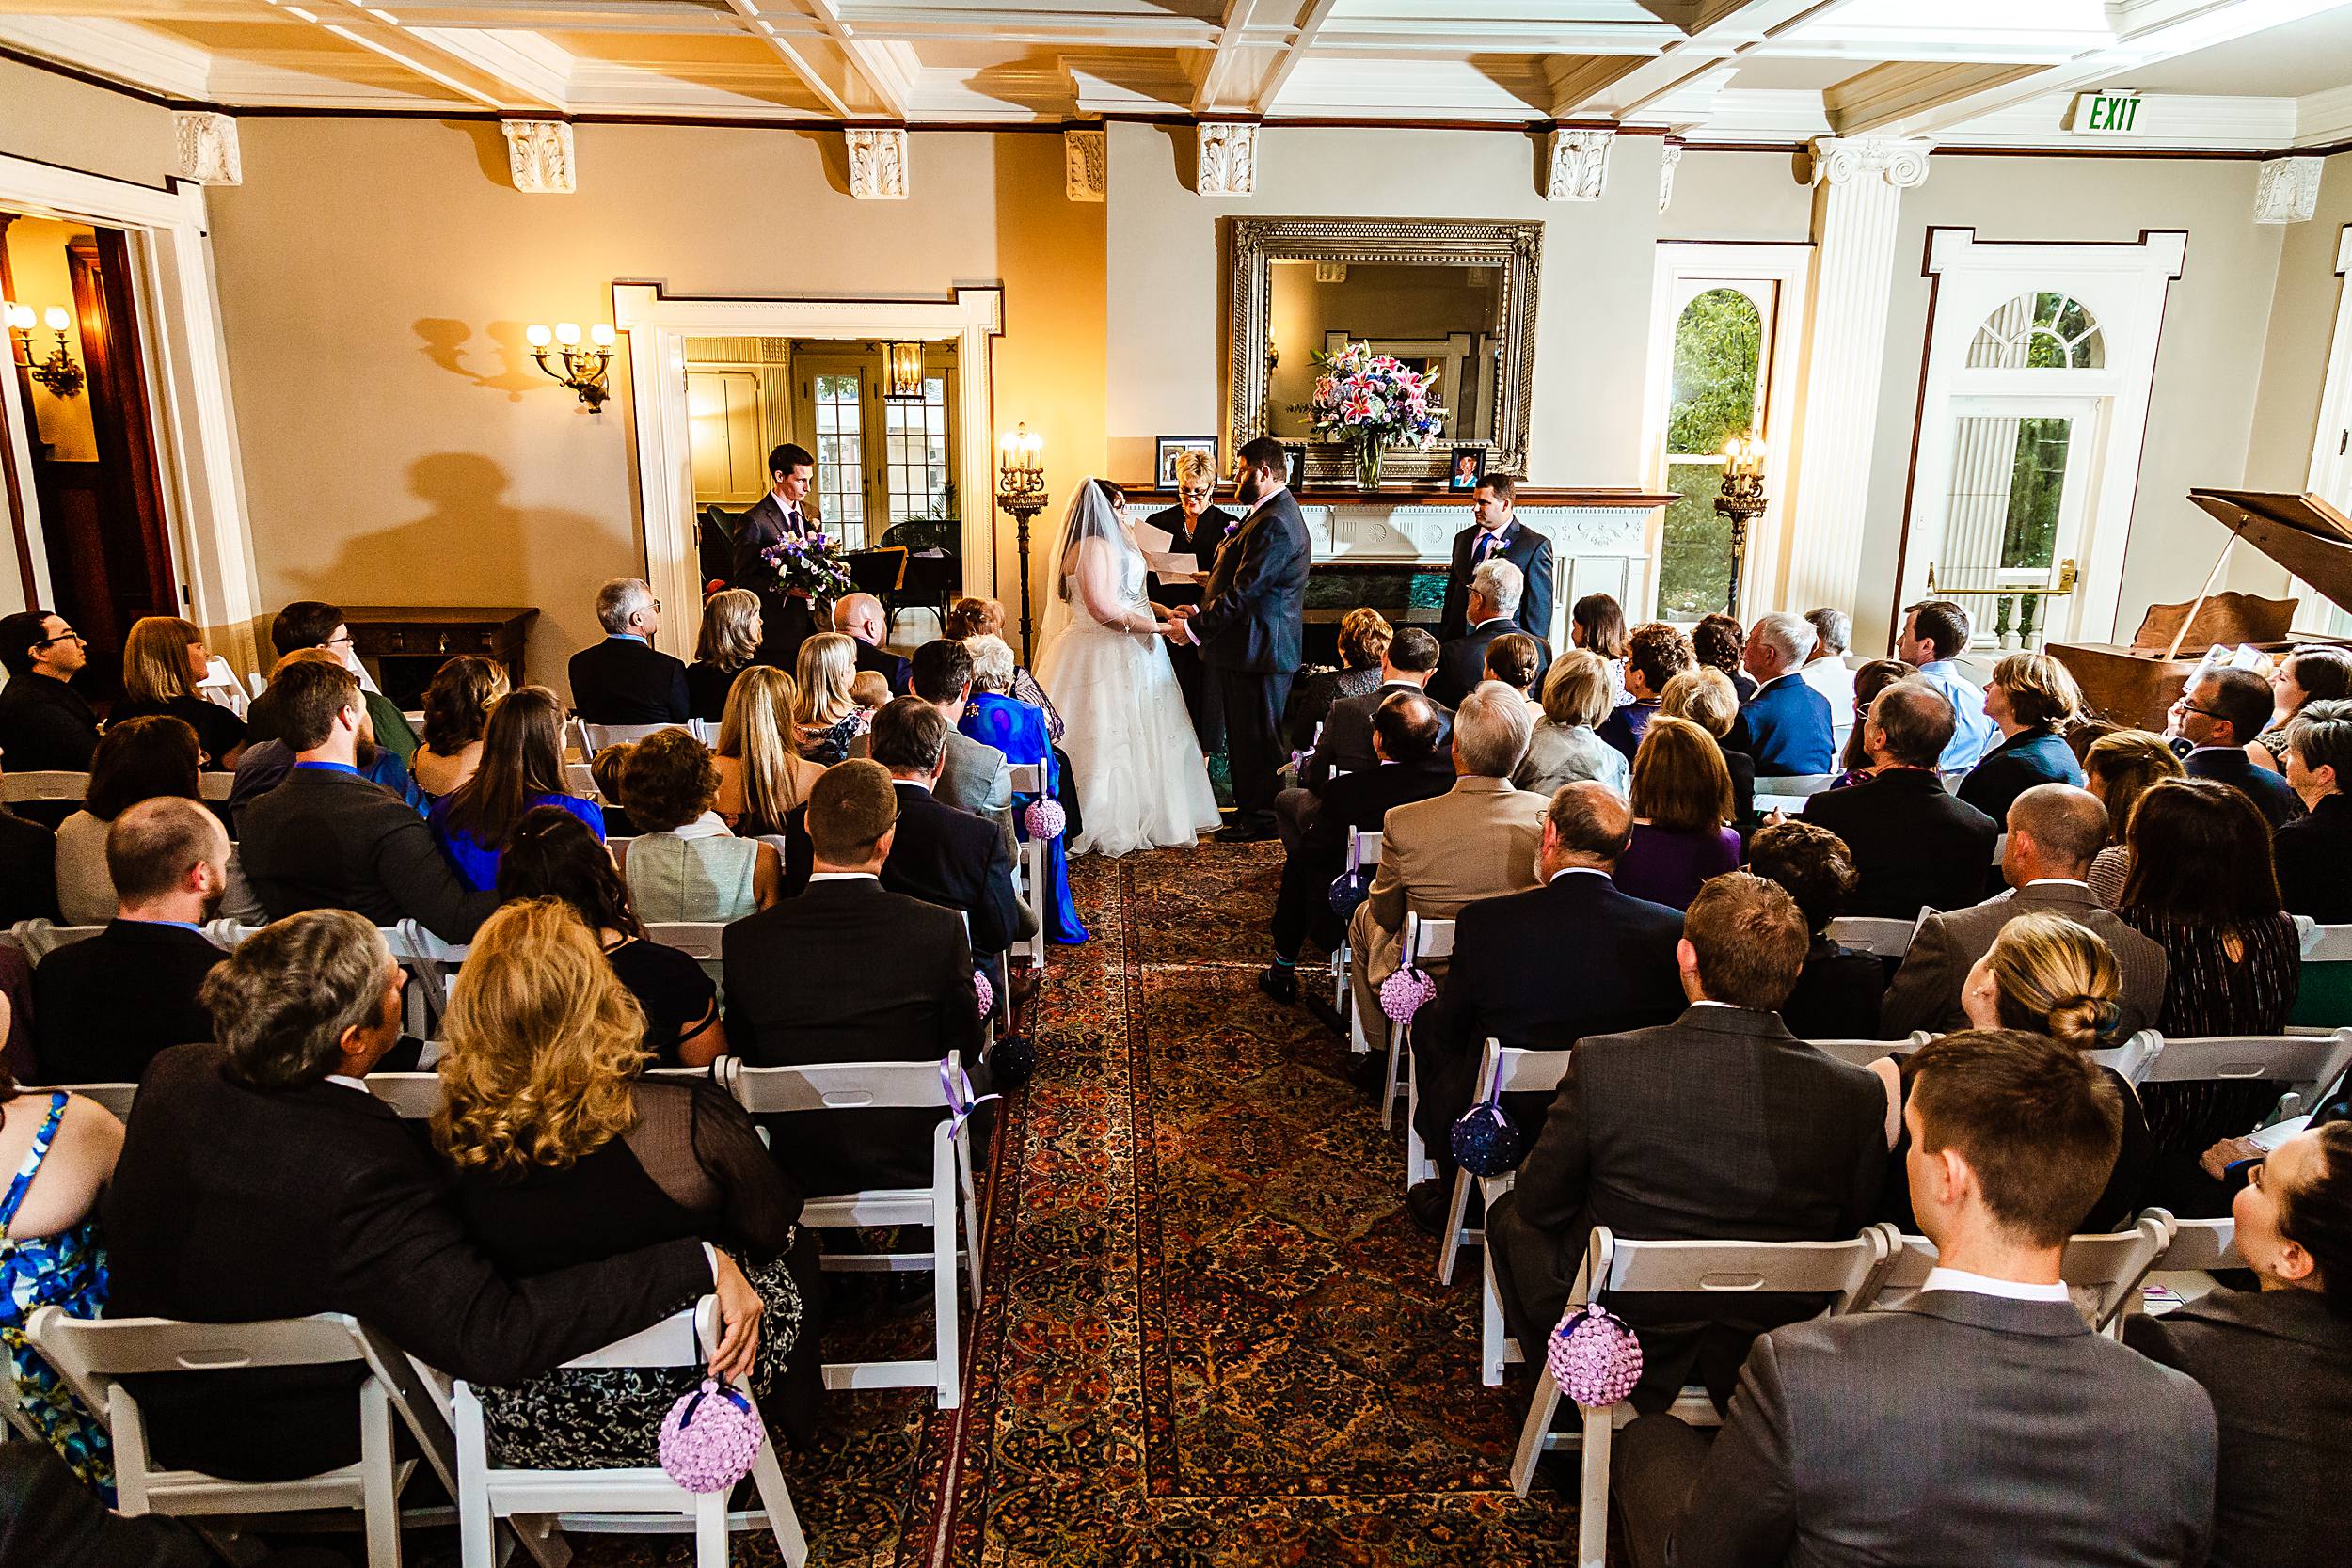 The Grant-Humphrey's Mansion in Denver is an affordable wedding venue in Denver with elegant interiors.